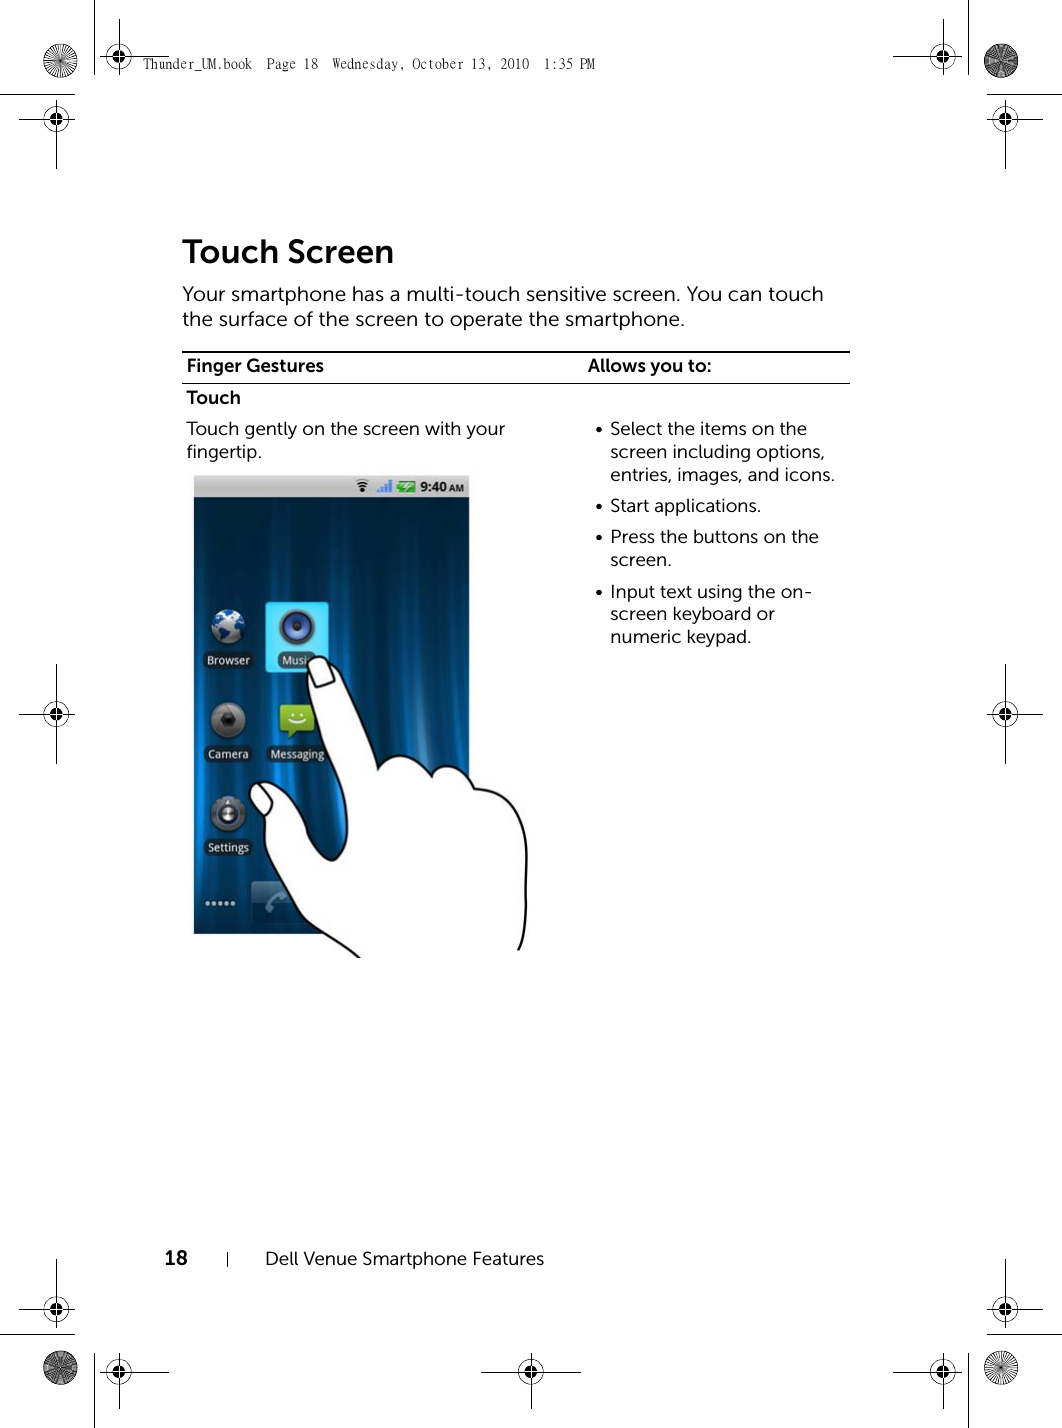 18 Dell Venue Smartphone FeaturesTouch ScreenYour smartphone has a multi-touch sensitive screen. You can touch the surface of the screen to operate the smartphone.Finger Gestures Allows you to:TouchTouch gently on the screen with your fingertip.• Select the items on the screen including options, entries, images, and icons.• Start applications.• Press the buttons on the screen.• Input text using the on-screen keyboard or numeric keypad.Thunder_UM.book  Page 18  Wednesday, October 13, 2010  1:35 PM